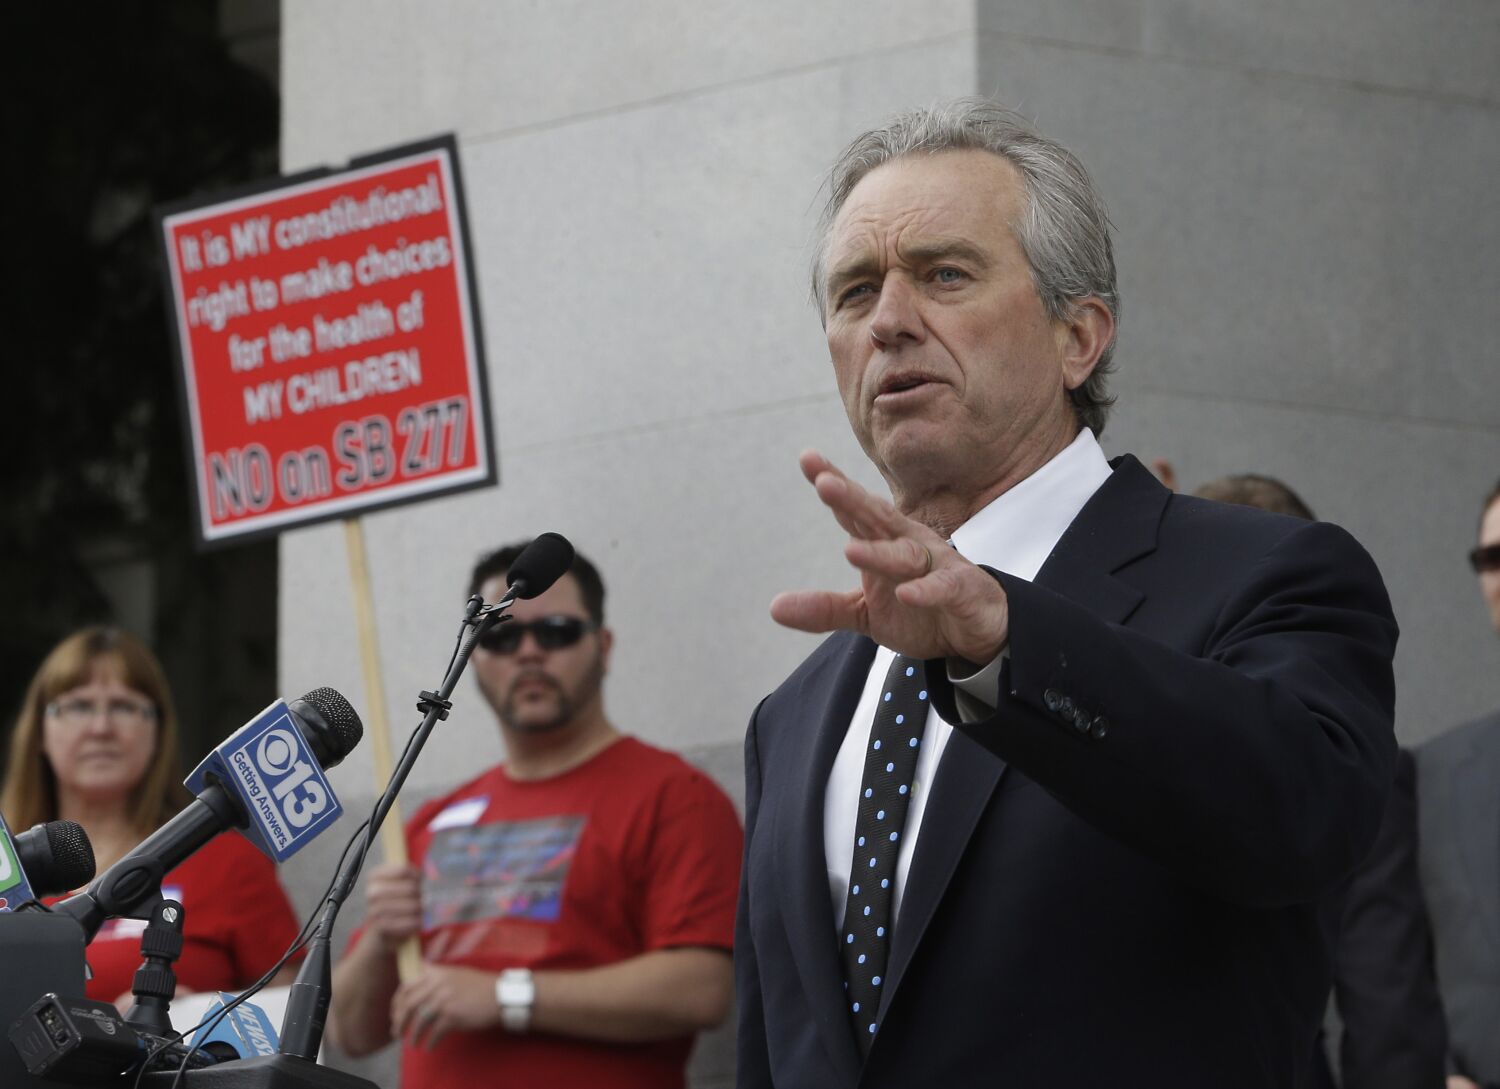 Abcarian: In terms of ignorance, Robert F. Kennedy Jr.'s presidential bid is the second coming of Donald Trump